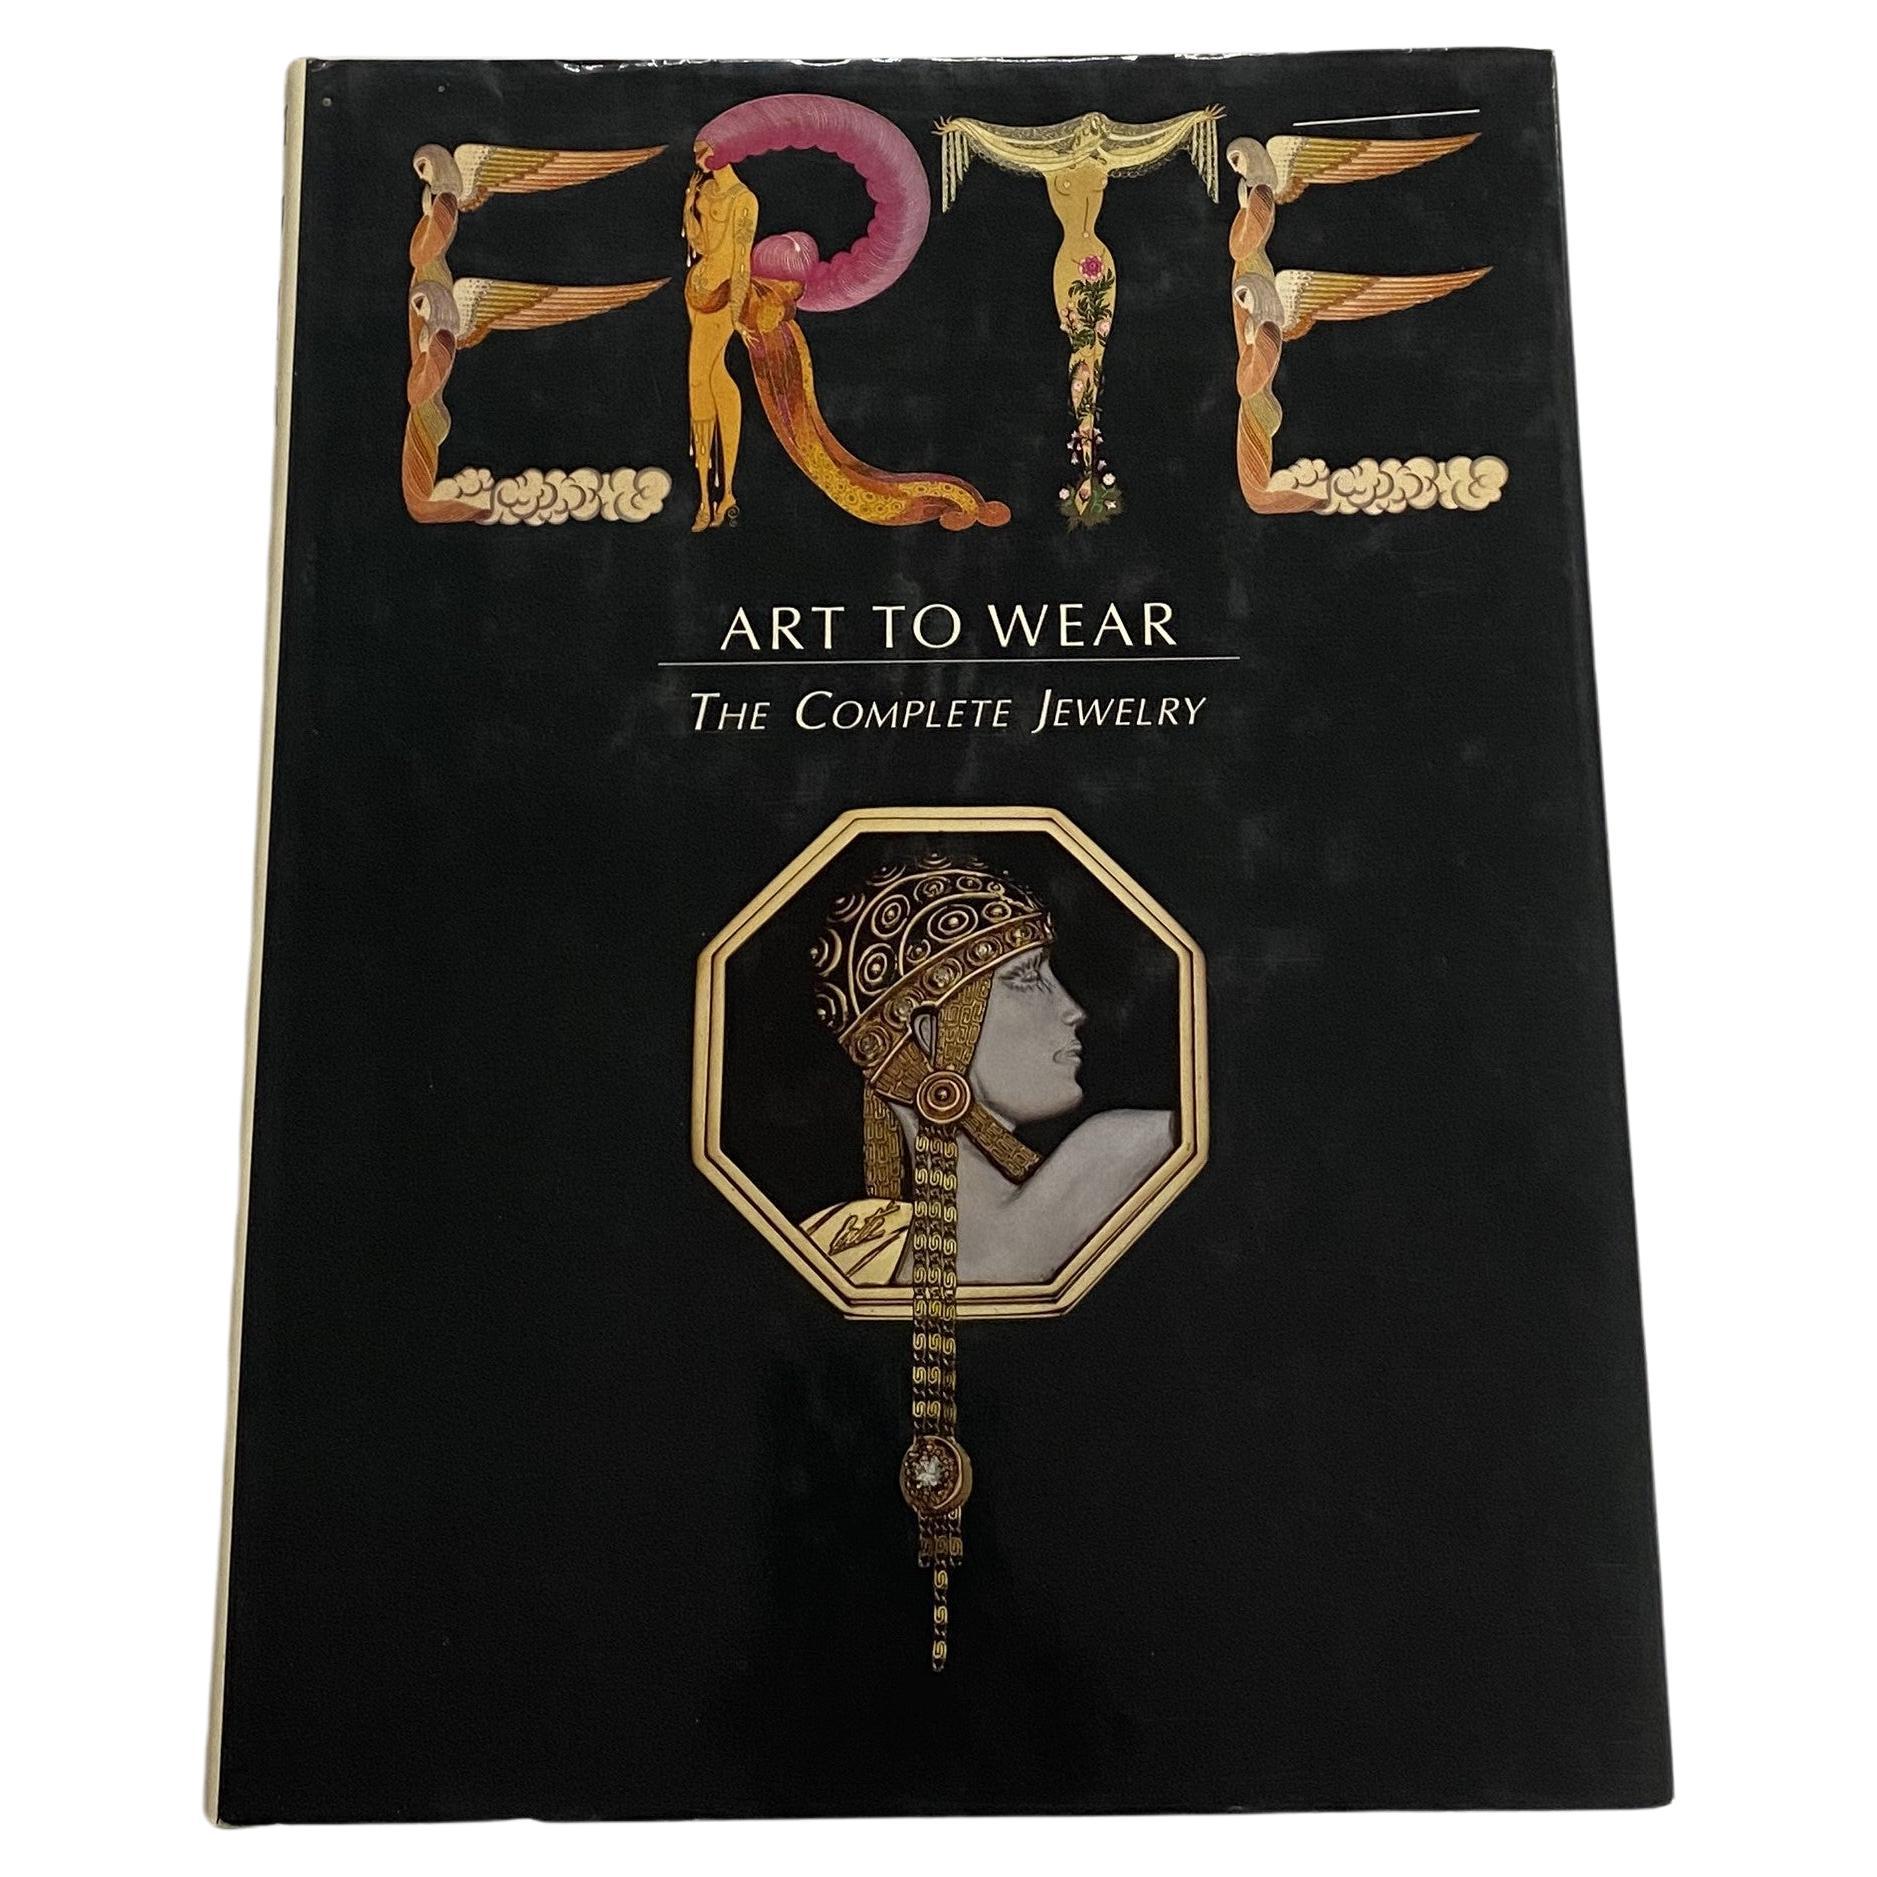 Erte Art to Wear: The Complete Jewelry edited by Marshall Lee (Book)